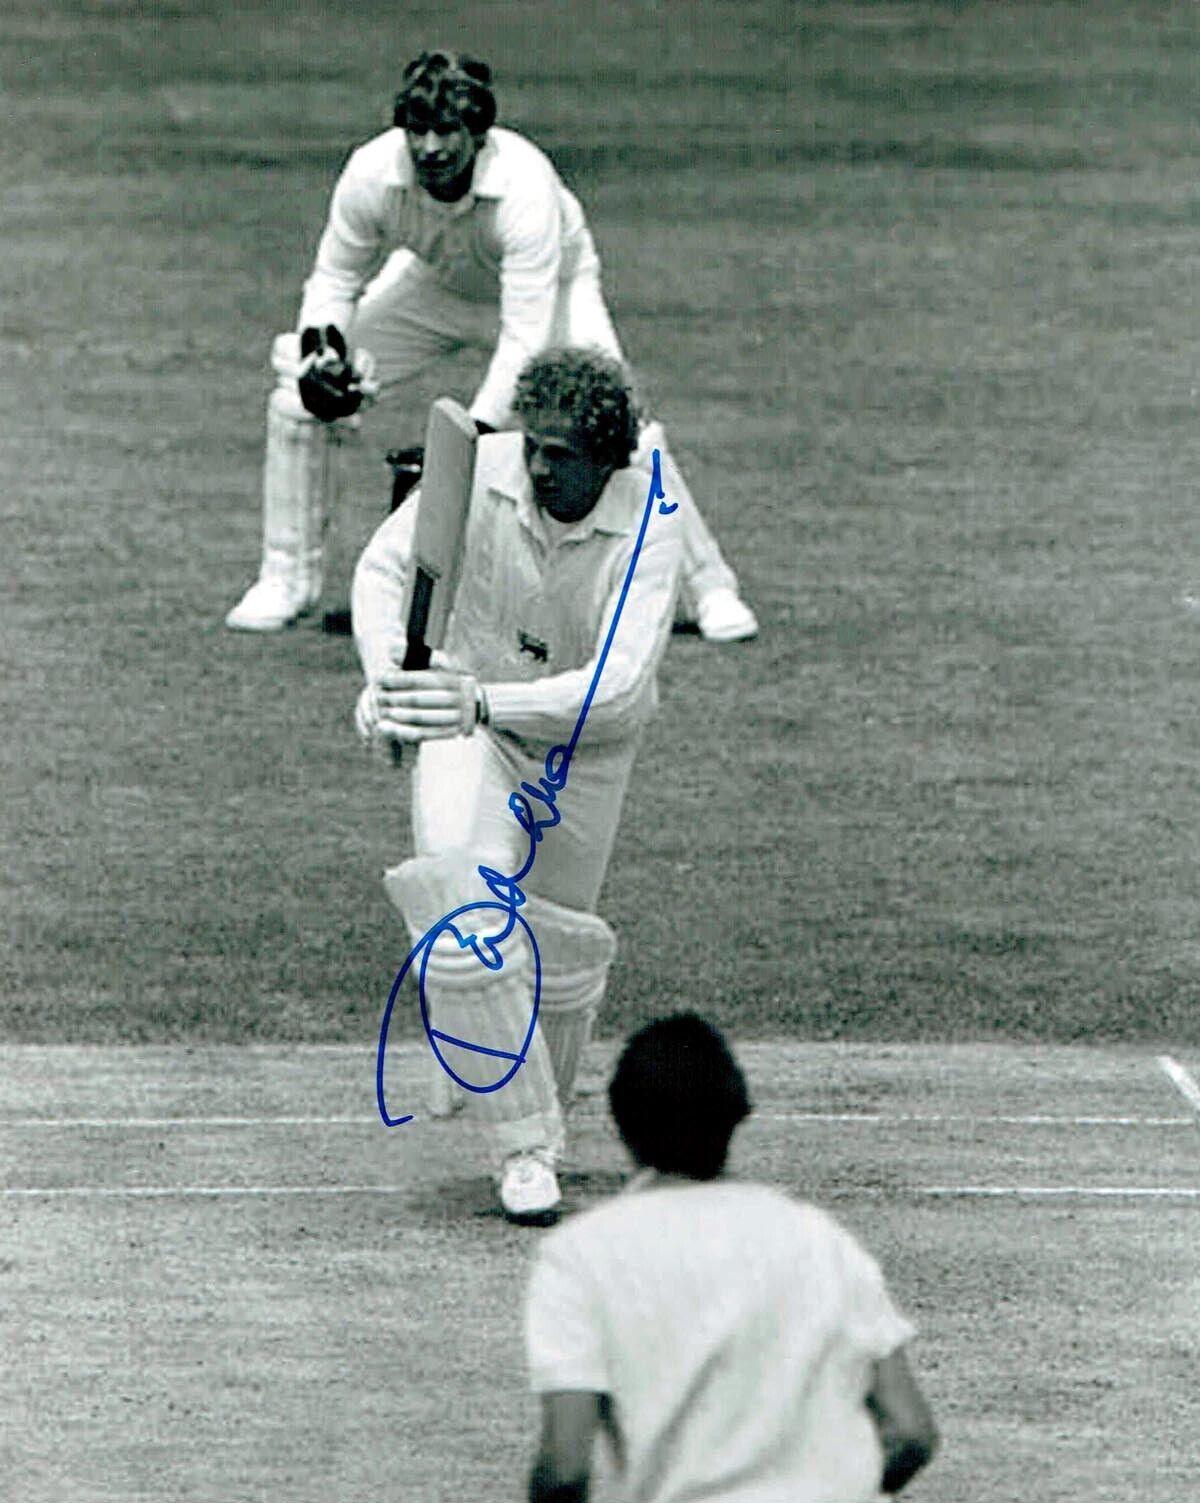 David GOWER Signed Autograph 10x8 Photo Poster painting 1 AFTAL COA England Cricket Captain